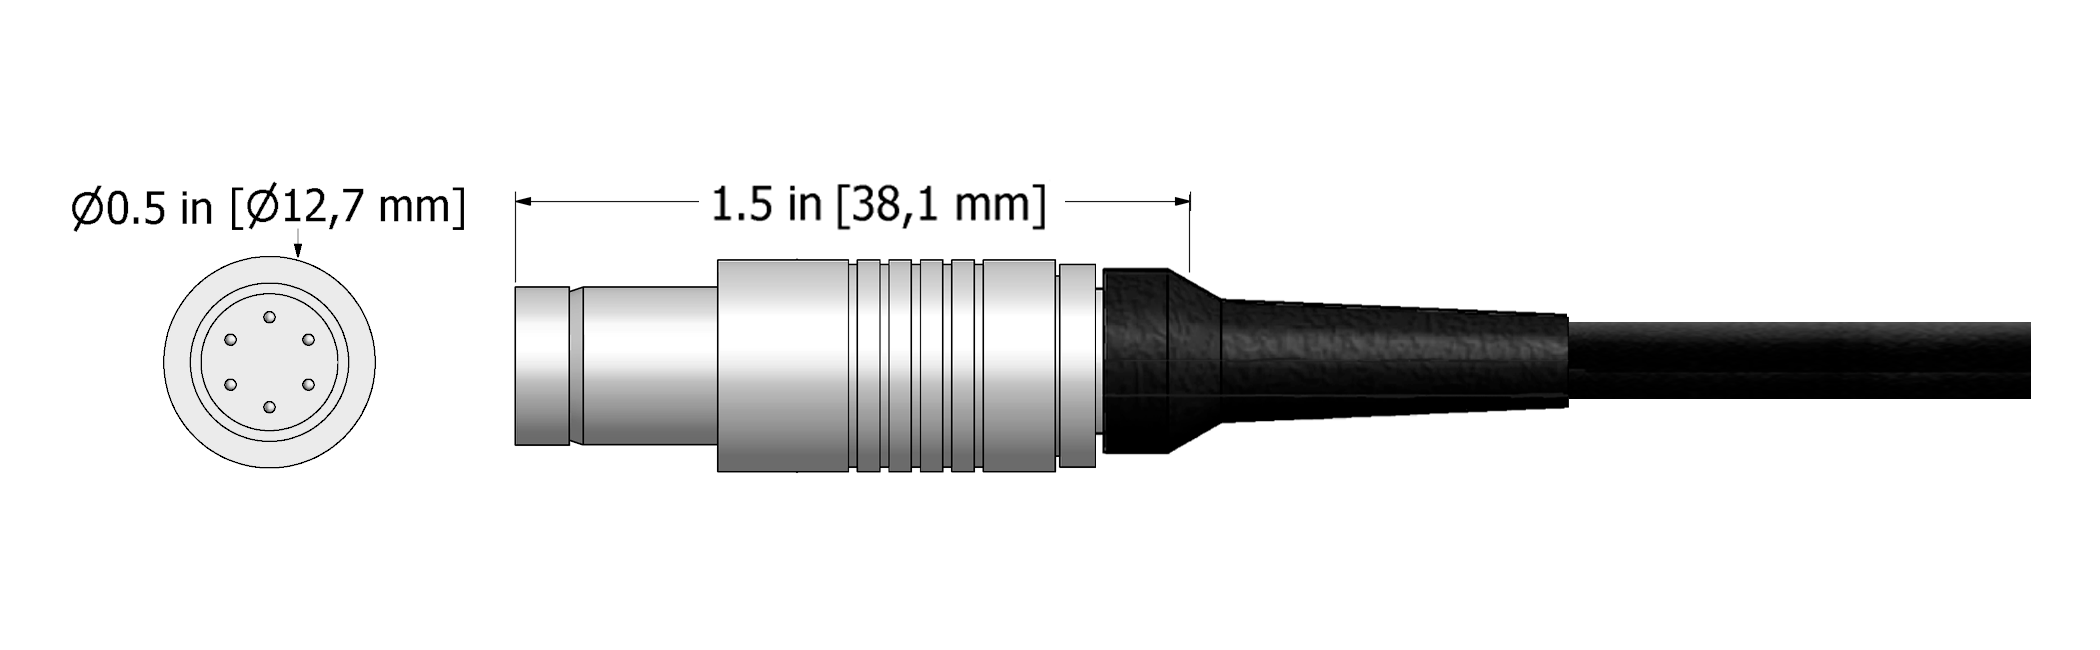 A line drawing showing the diameter and length of an assembled CTC C66 vibration sensor connector kit.